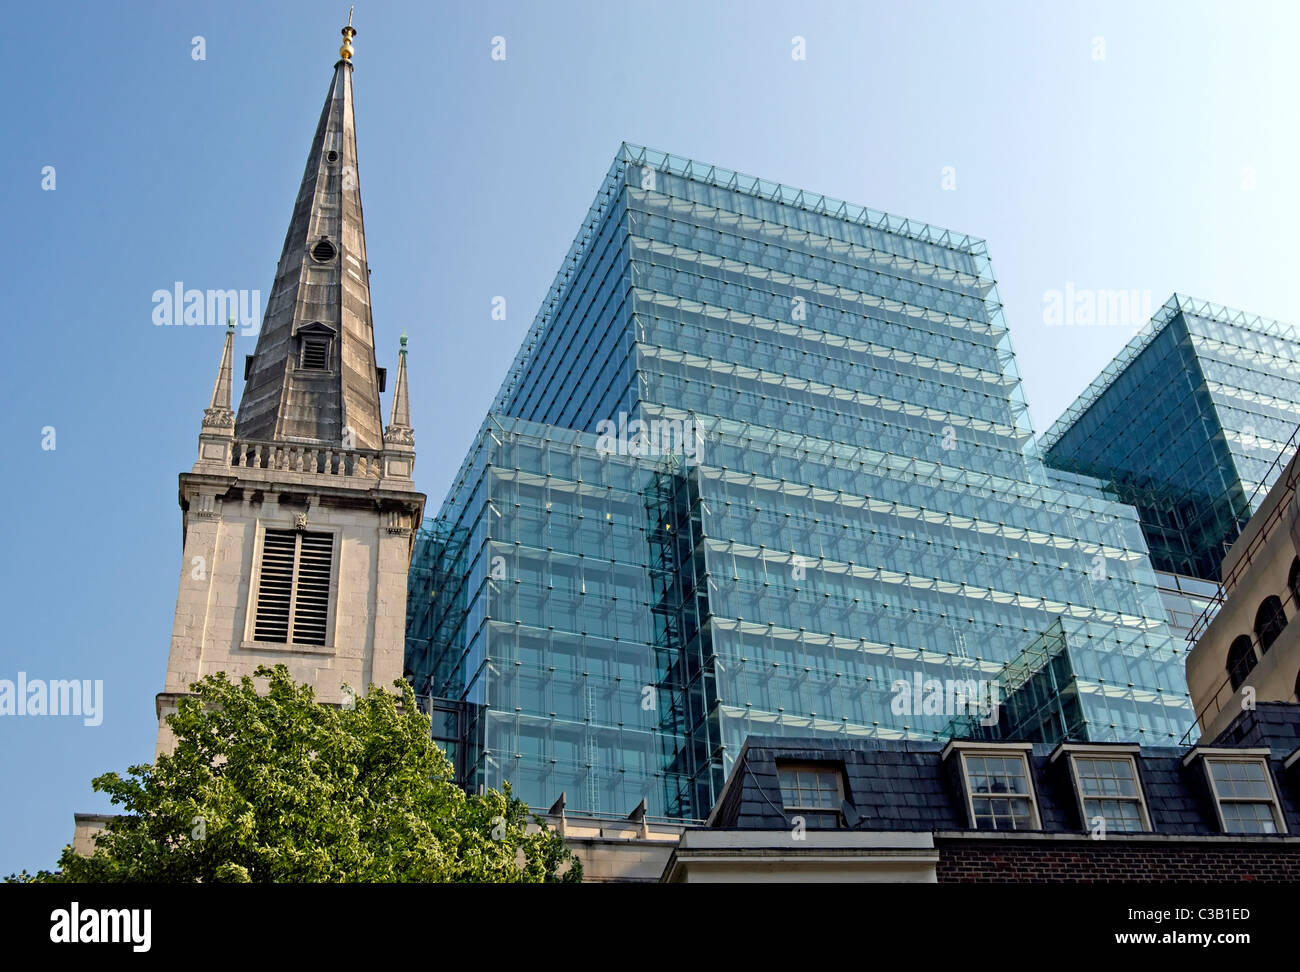 the 17th century tower and spire of  st margaret pattens church alongside the 2004 plantation place, city of london, england Stock Photo